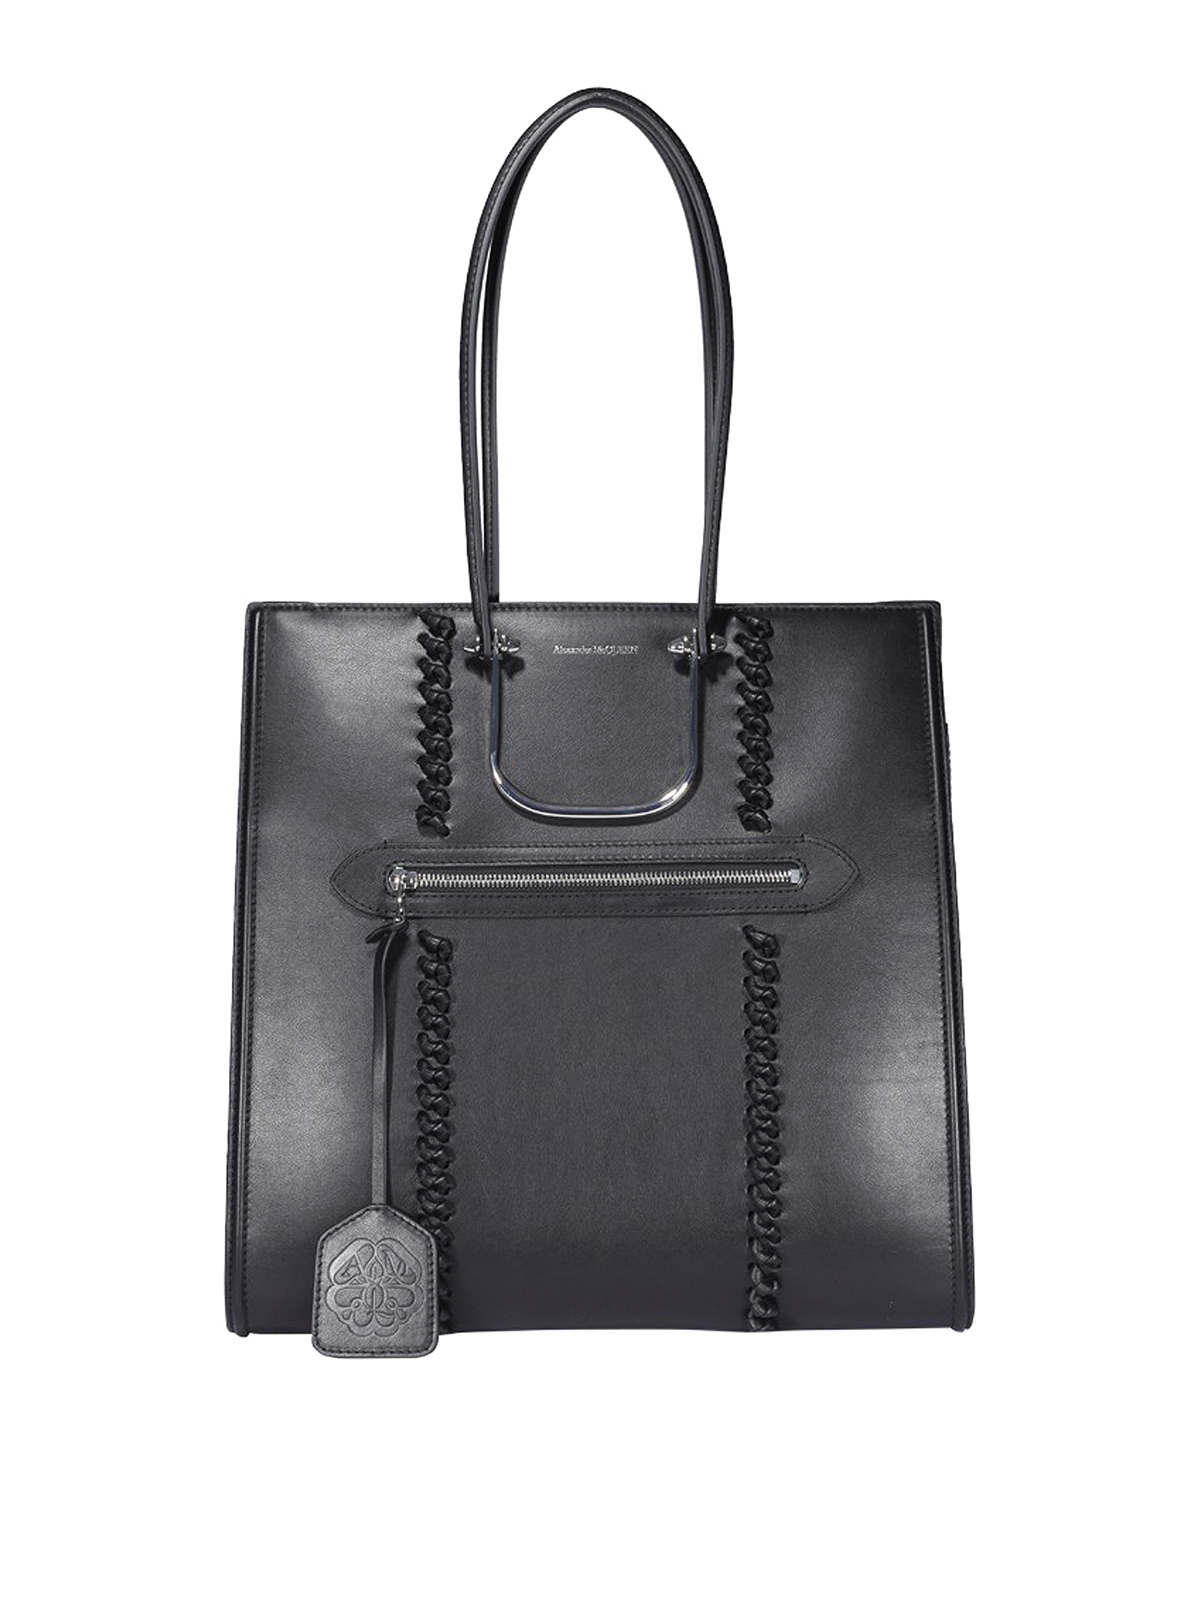 ALEXANDER MCQUEEN THE TALL STORY TOTE